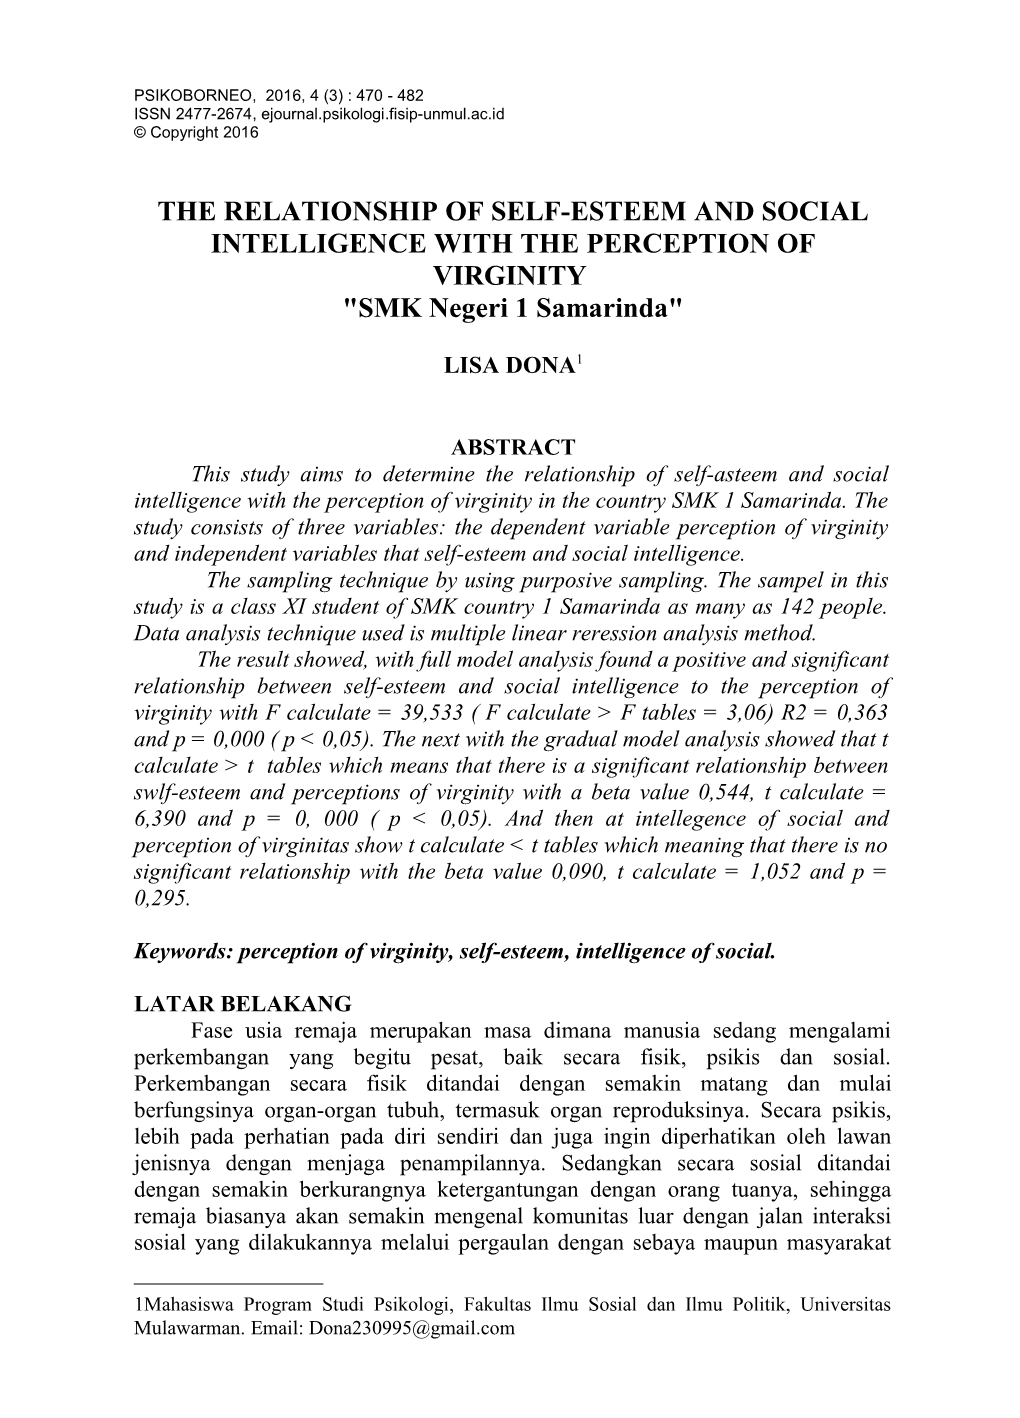 The Relationship of Self-Esteem and Social Intelligence (Lisa Dona)